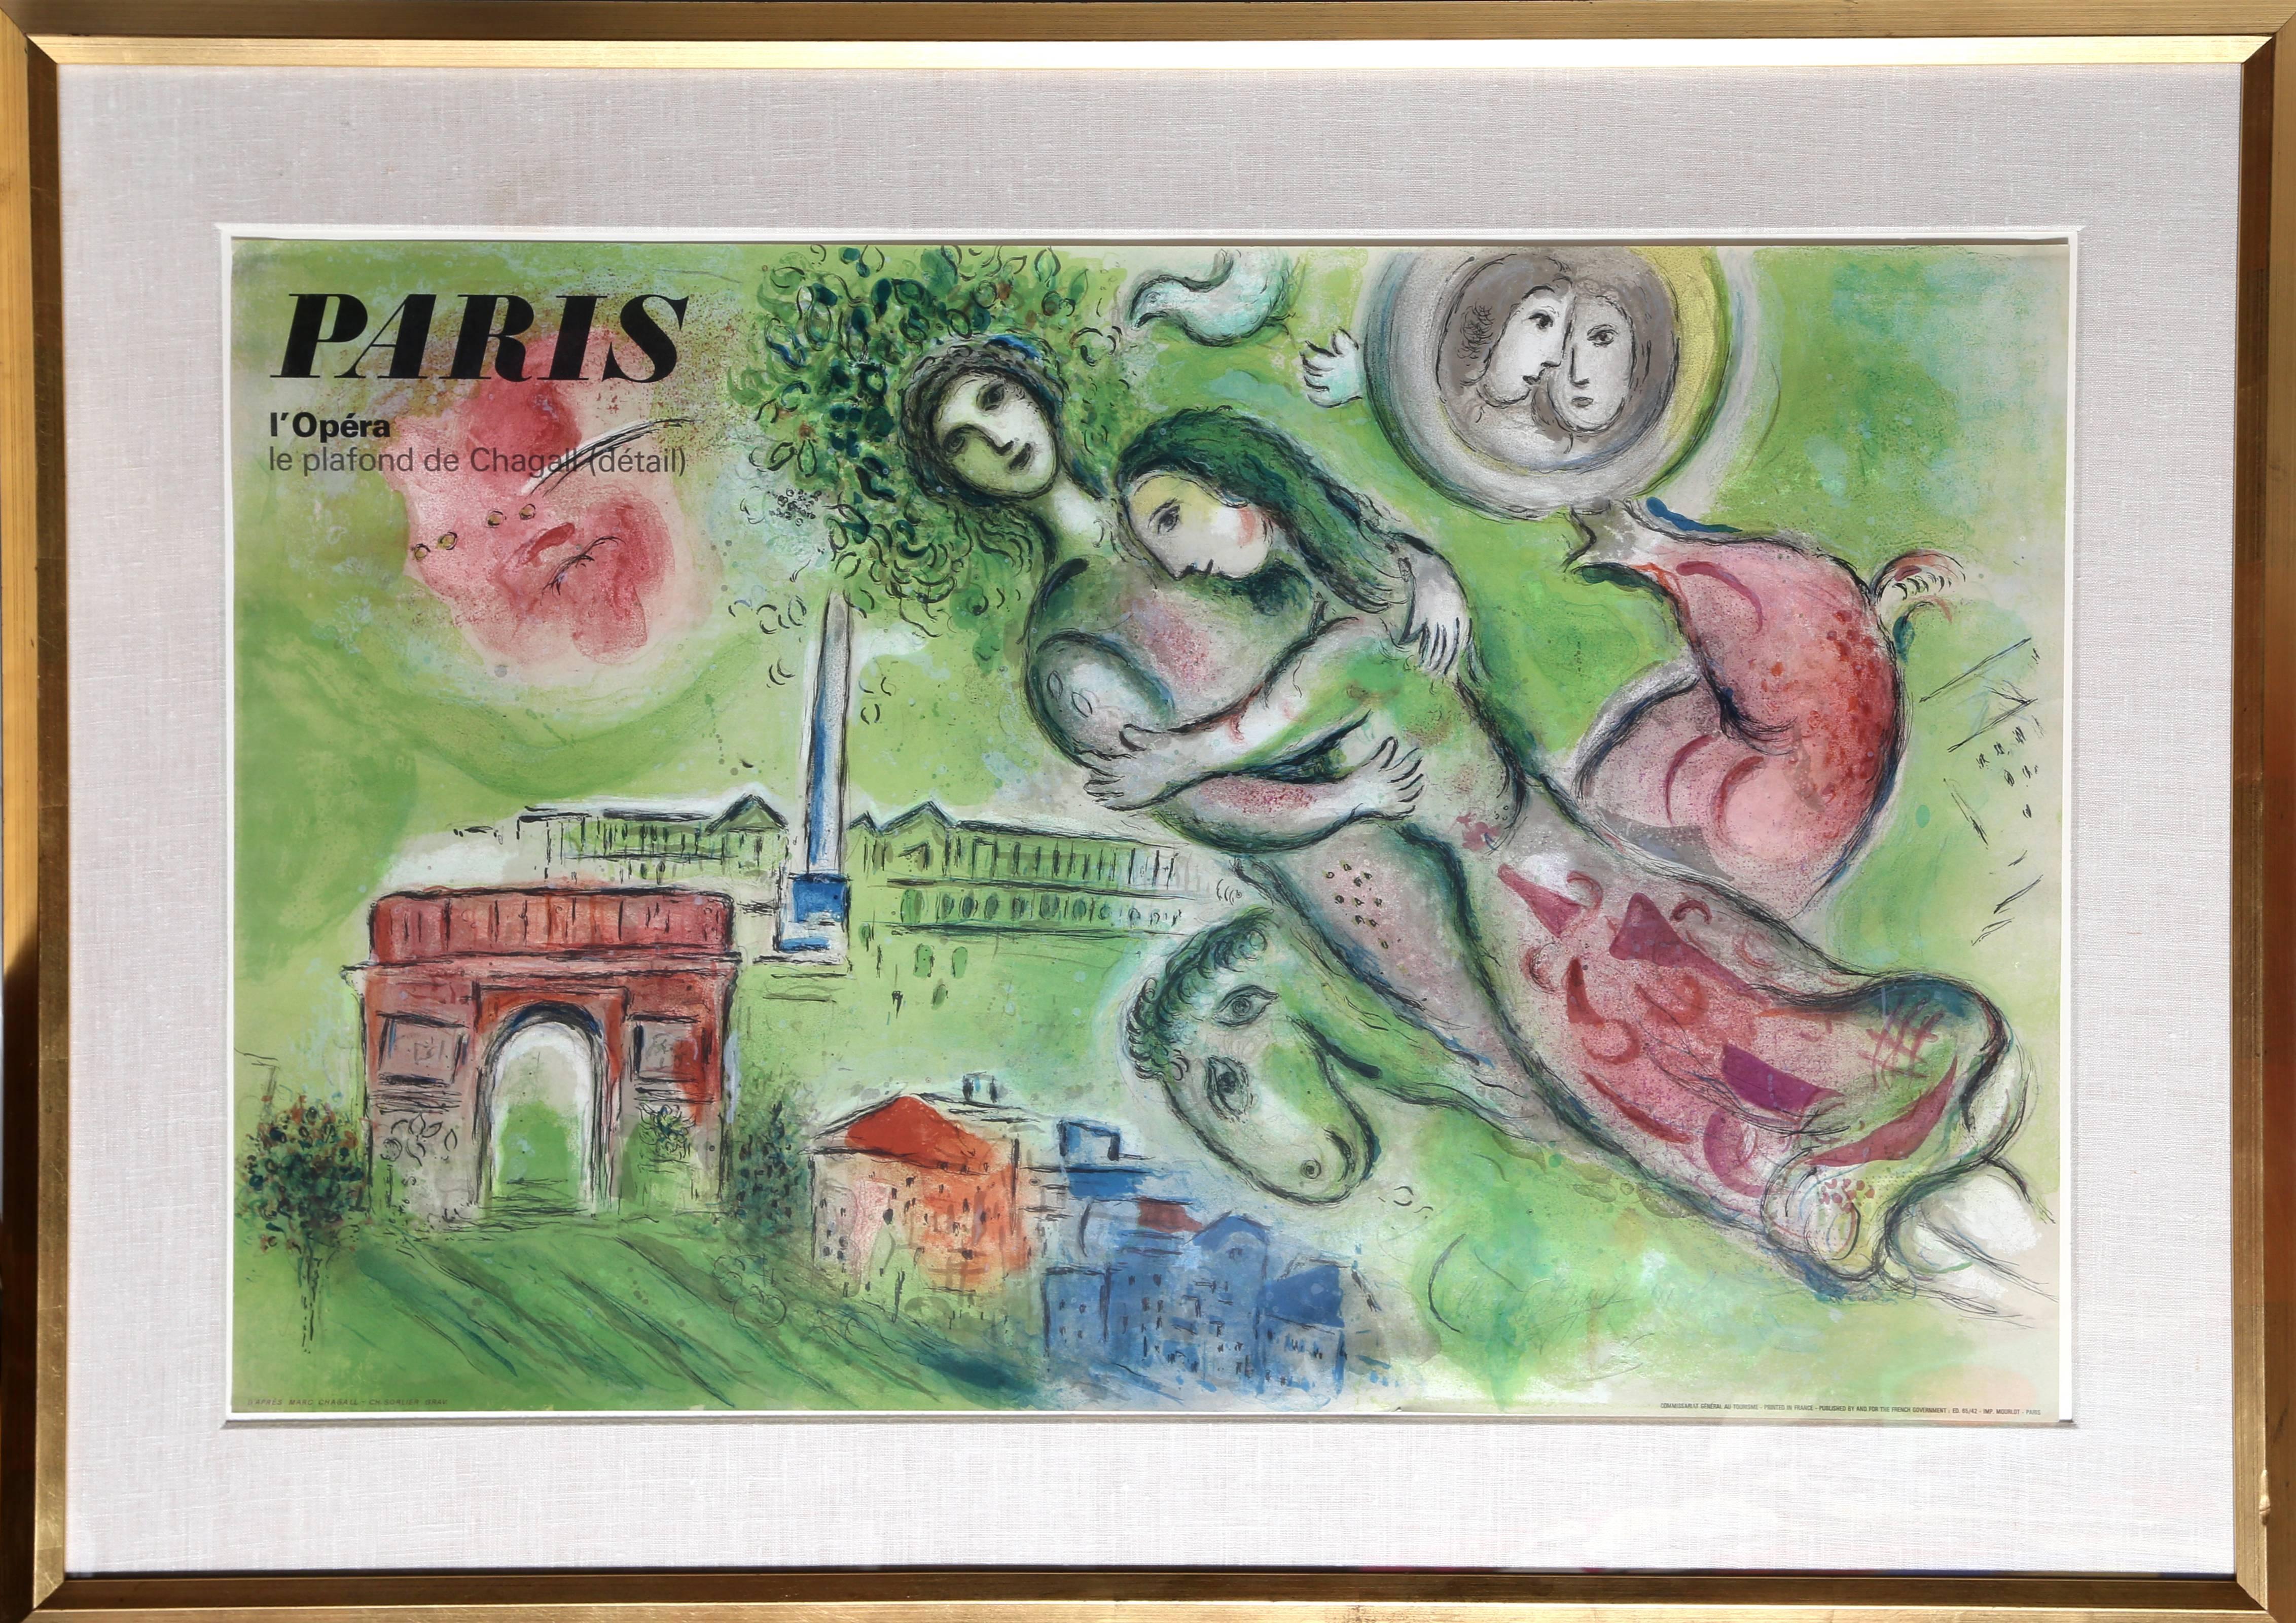 (after) Marc Chagall Figurative Print - Romeo and Juliet - Paris L'Opera - Le Plafond de Chagall, signed lithograph